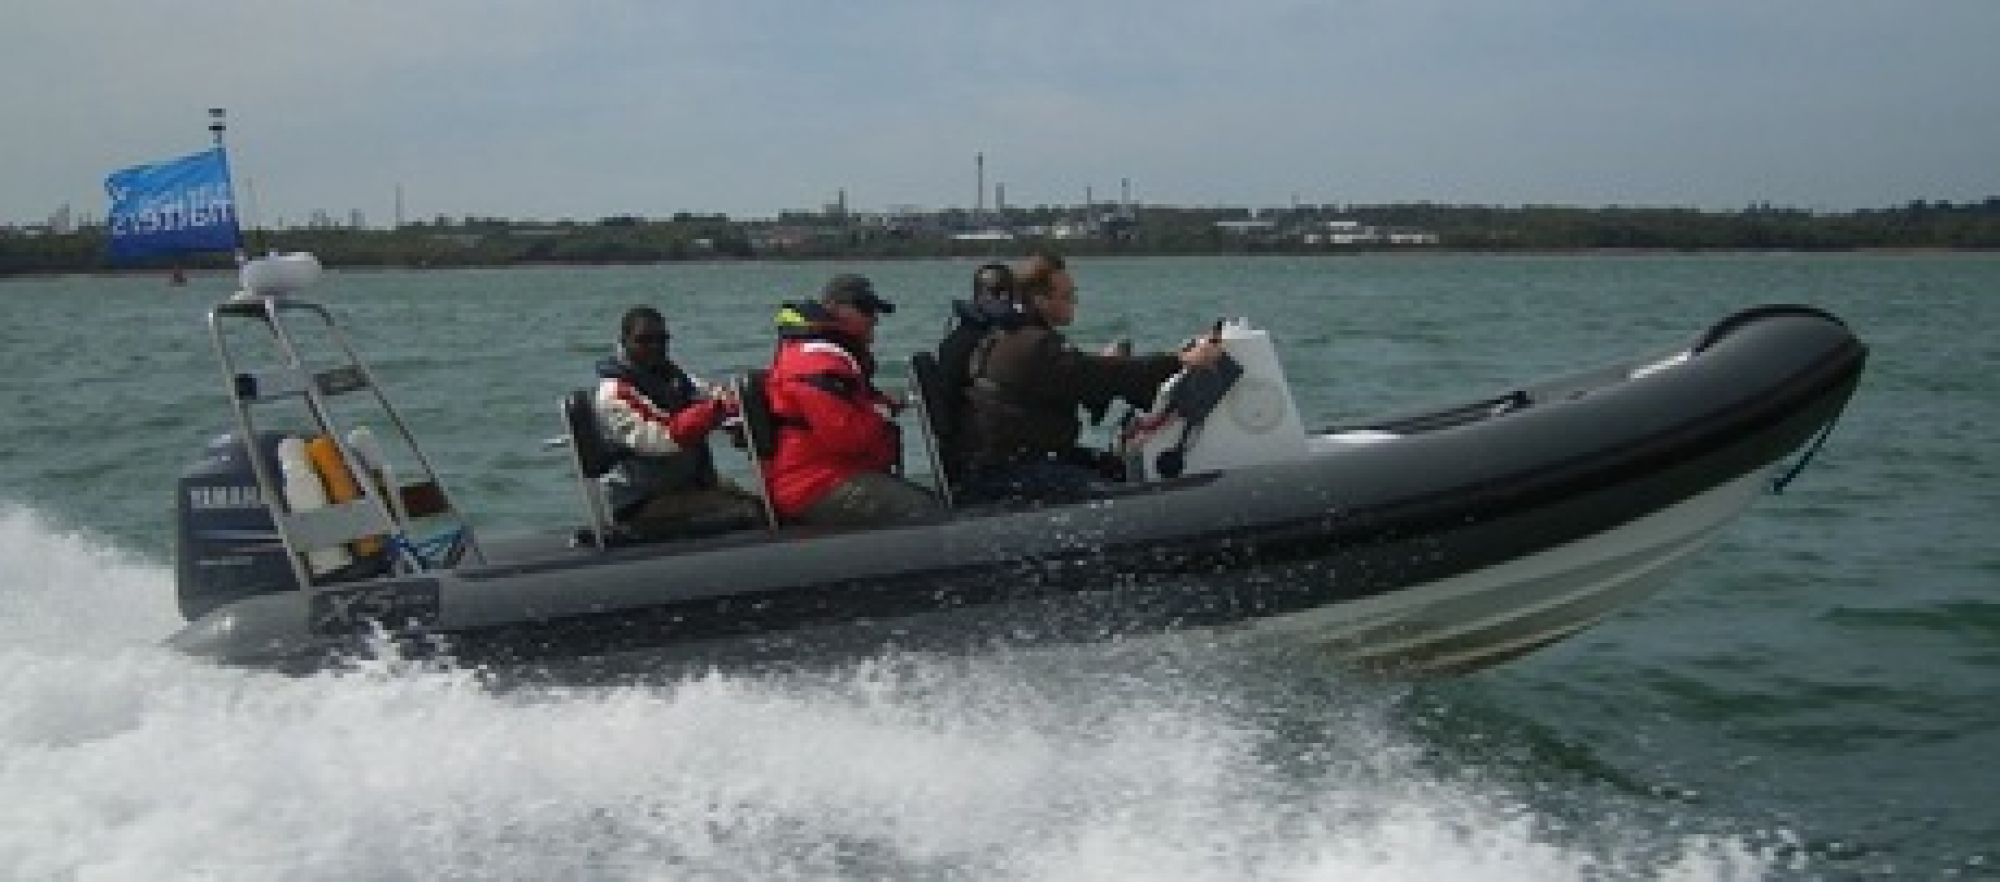 powerboat licence 2